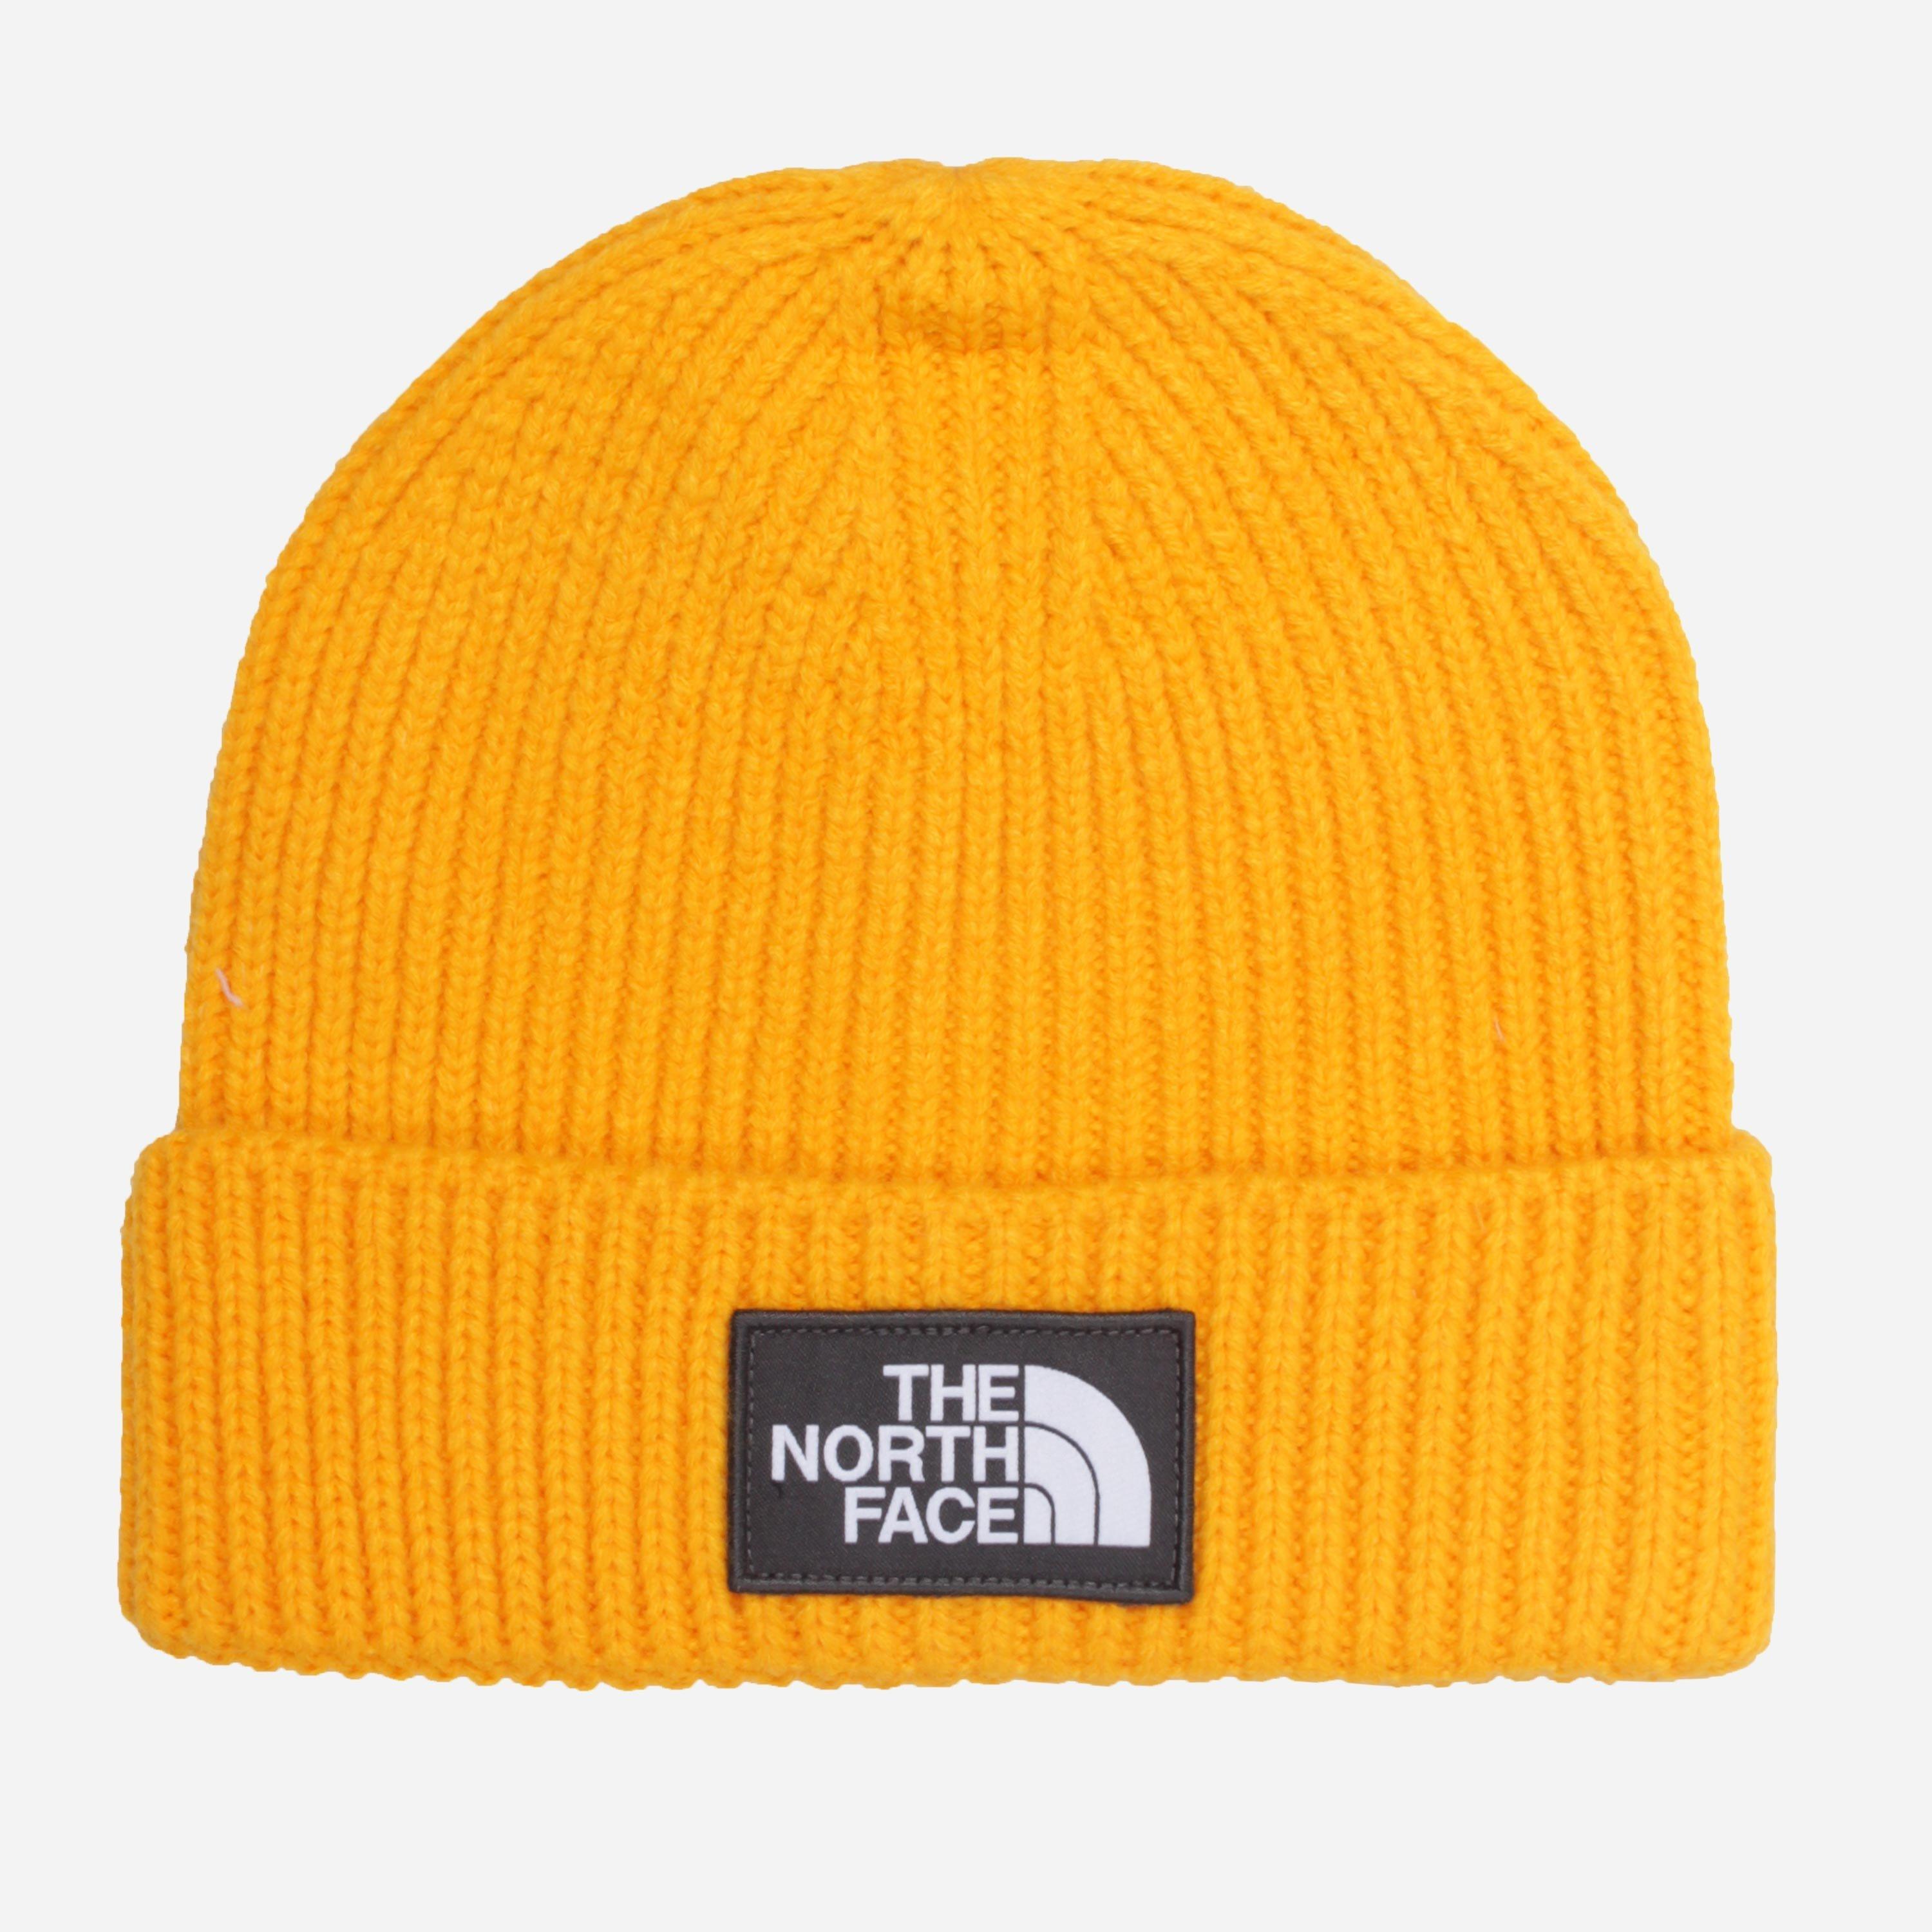 The North Face Box Logo Beanie in Yellow for Men - Lyst